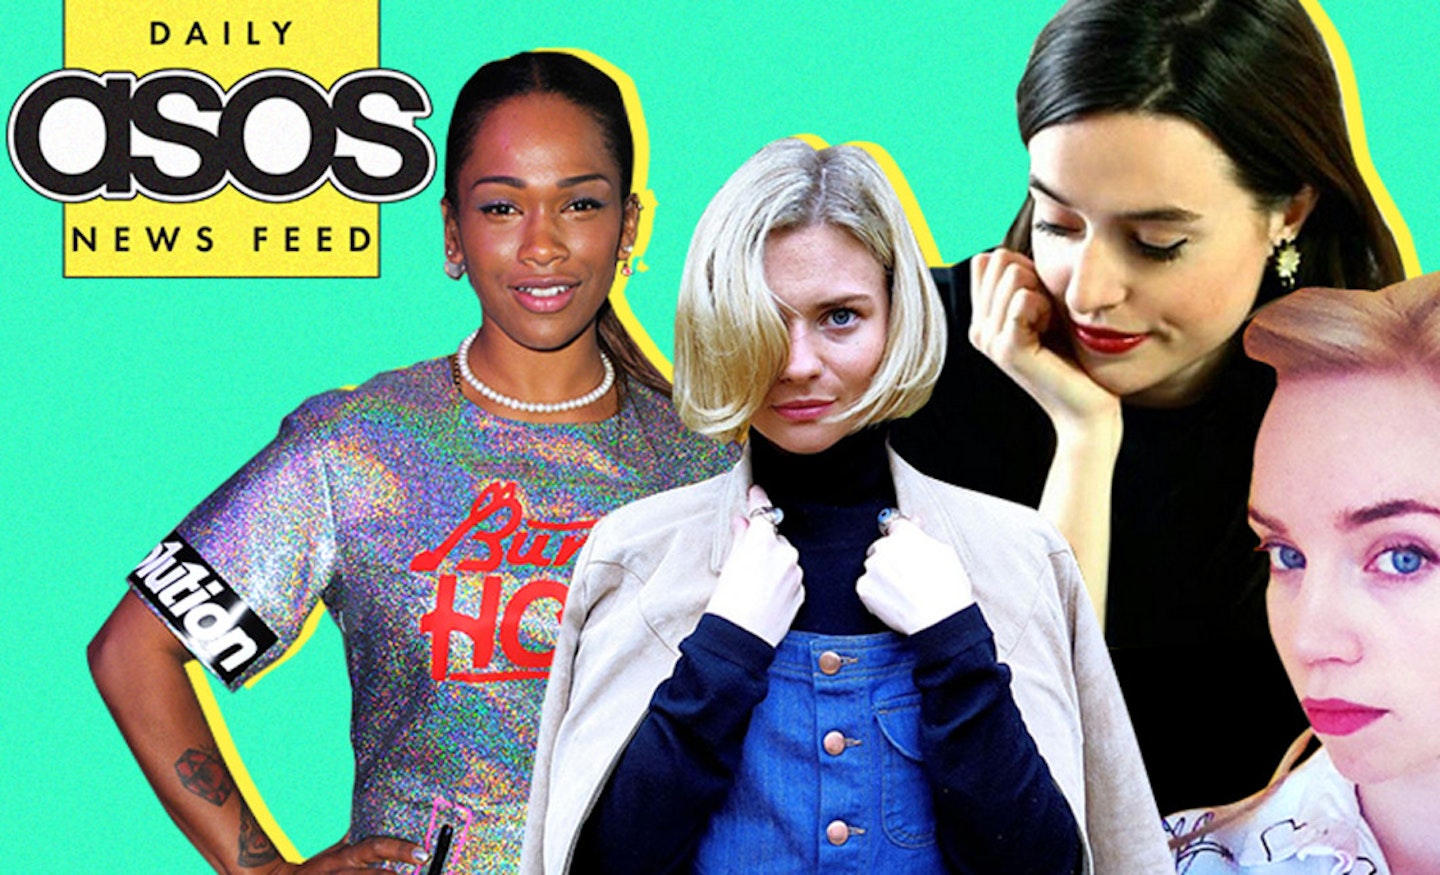 Find out how to get into fashion with the ASOS Daily News Panel